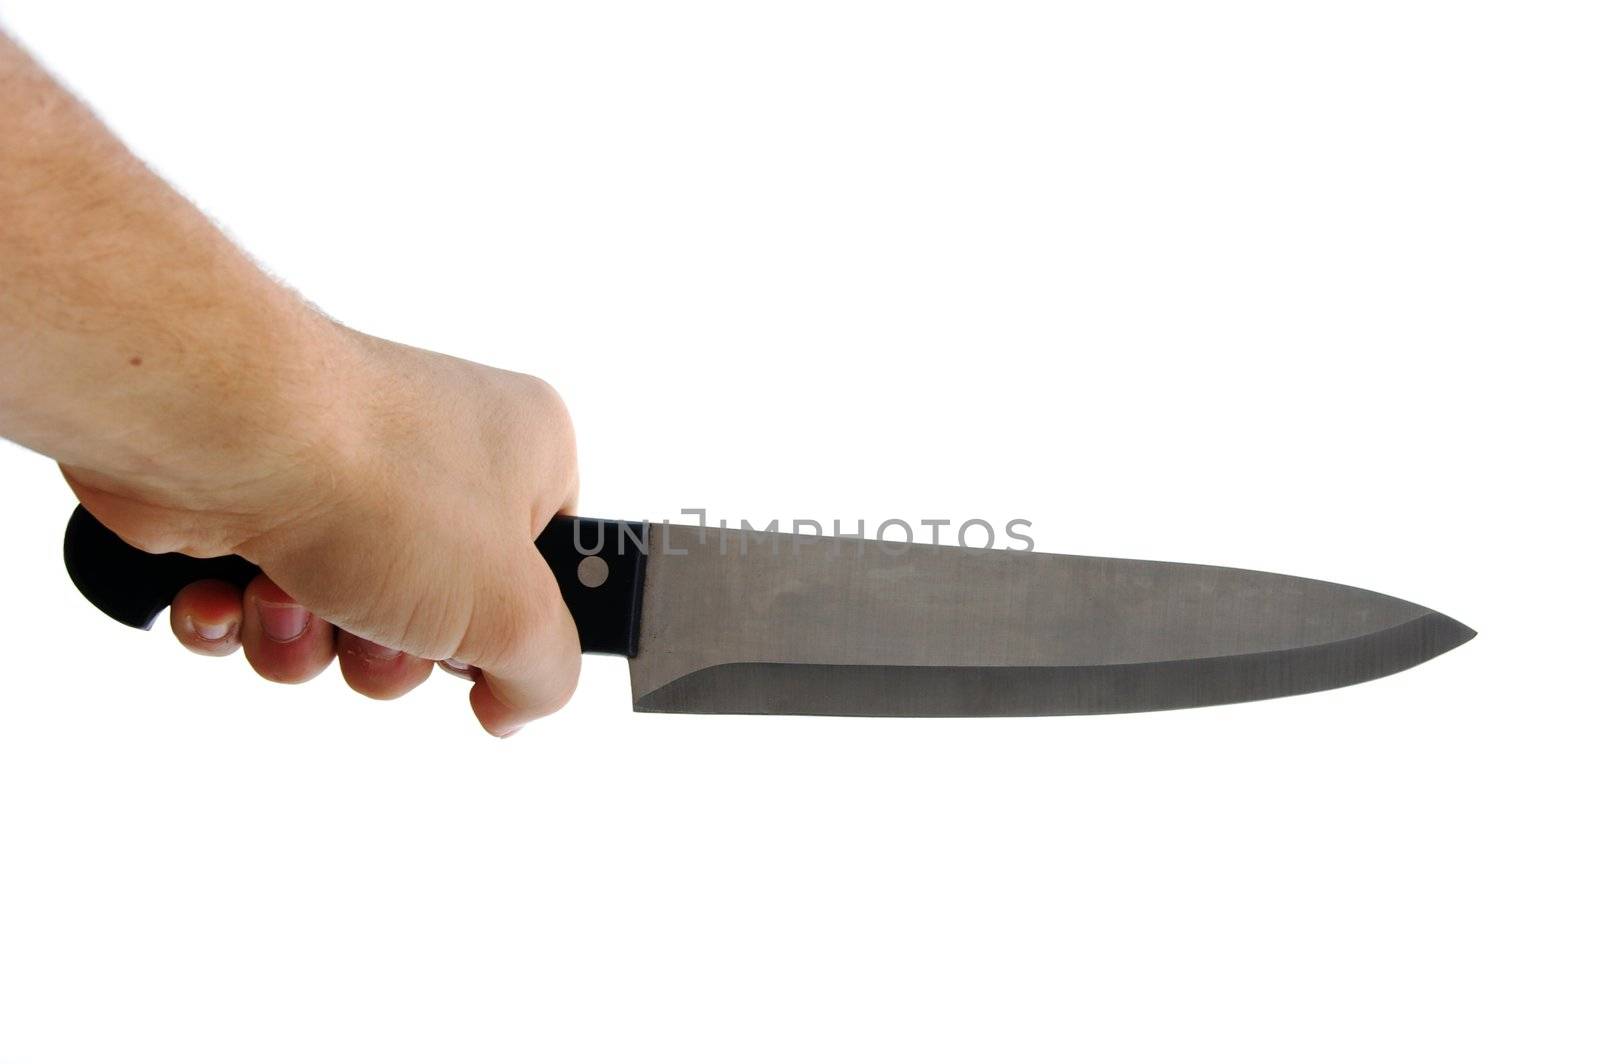 Human hand holding a knife isolated on white